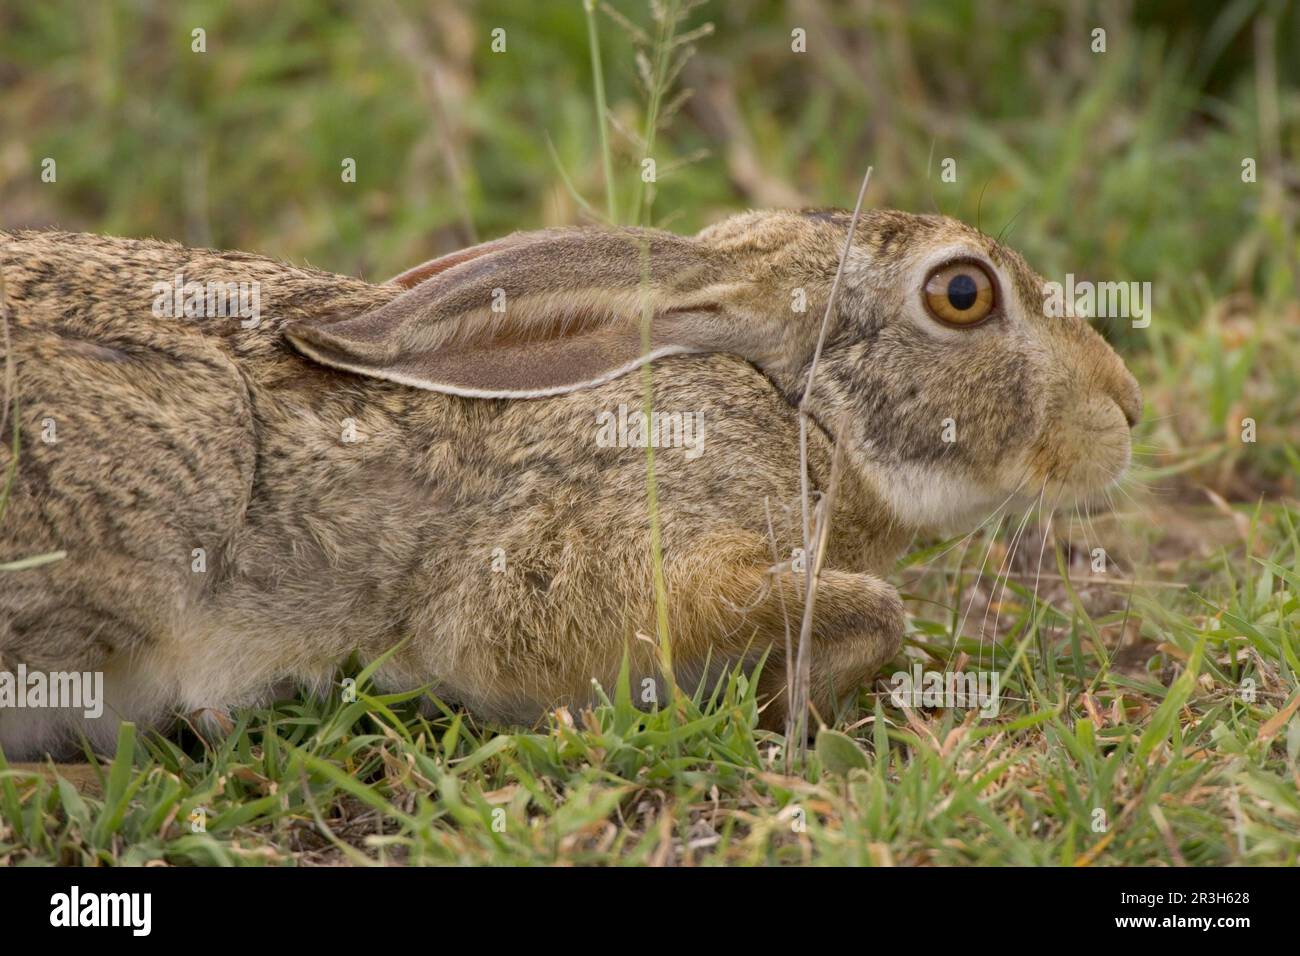 Cape hare, Cape hare, desert hares, Cape hares (Lepus capensis), hares, rodents, mammals, animals Hare, Tanzania Stock Photo